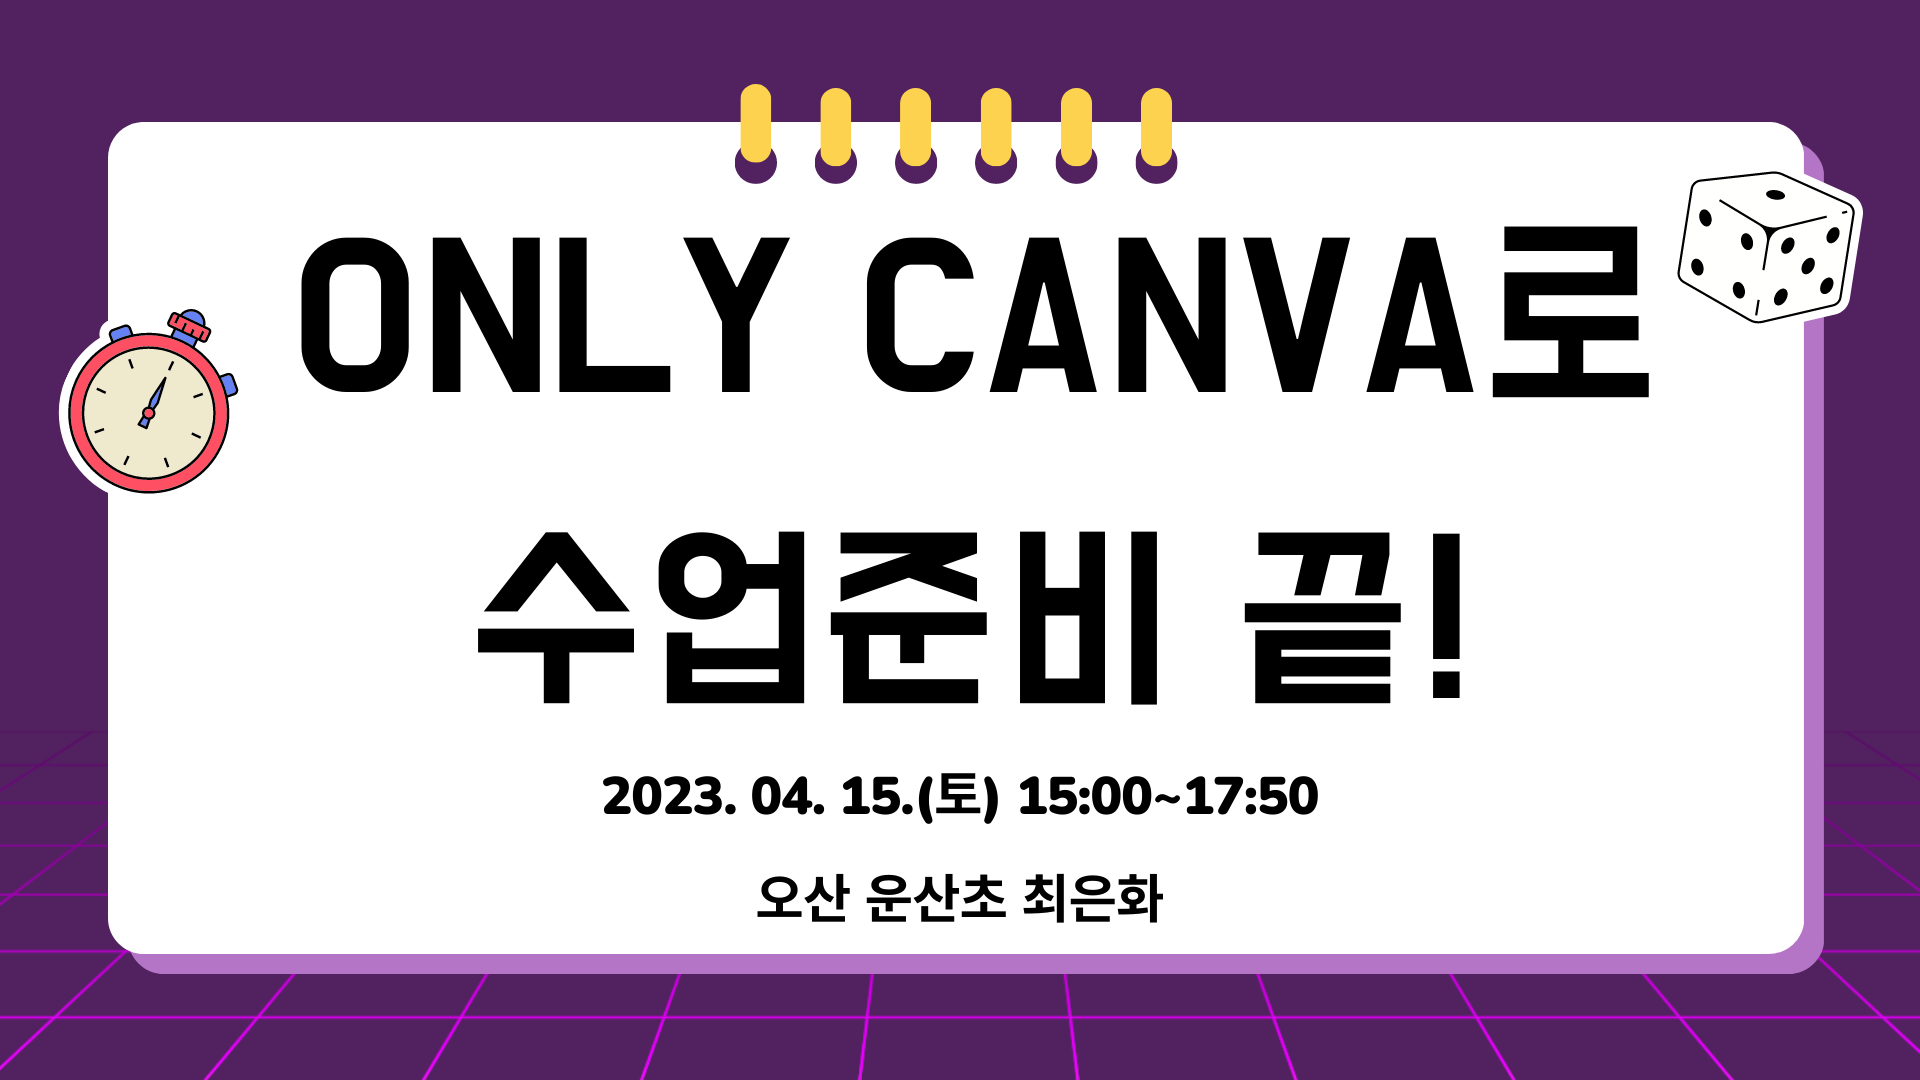 Only CANVA로 수업 준비 끝!